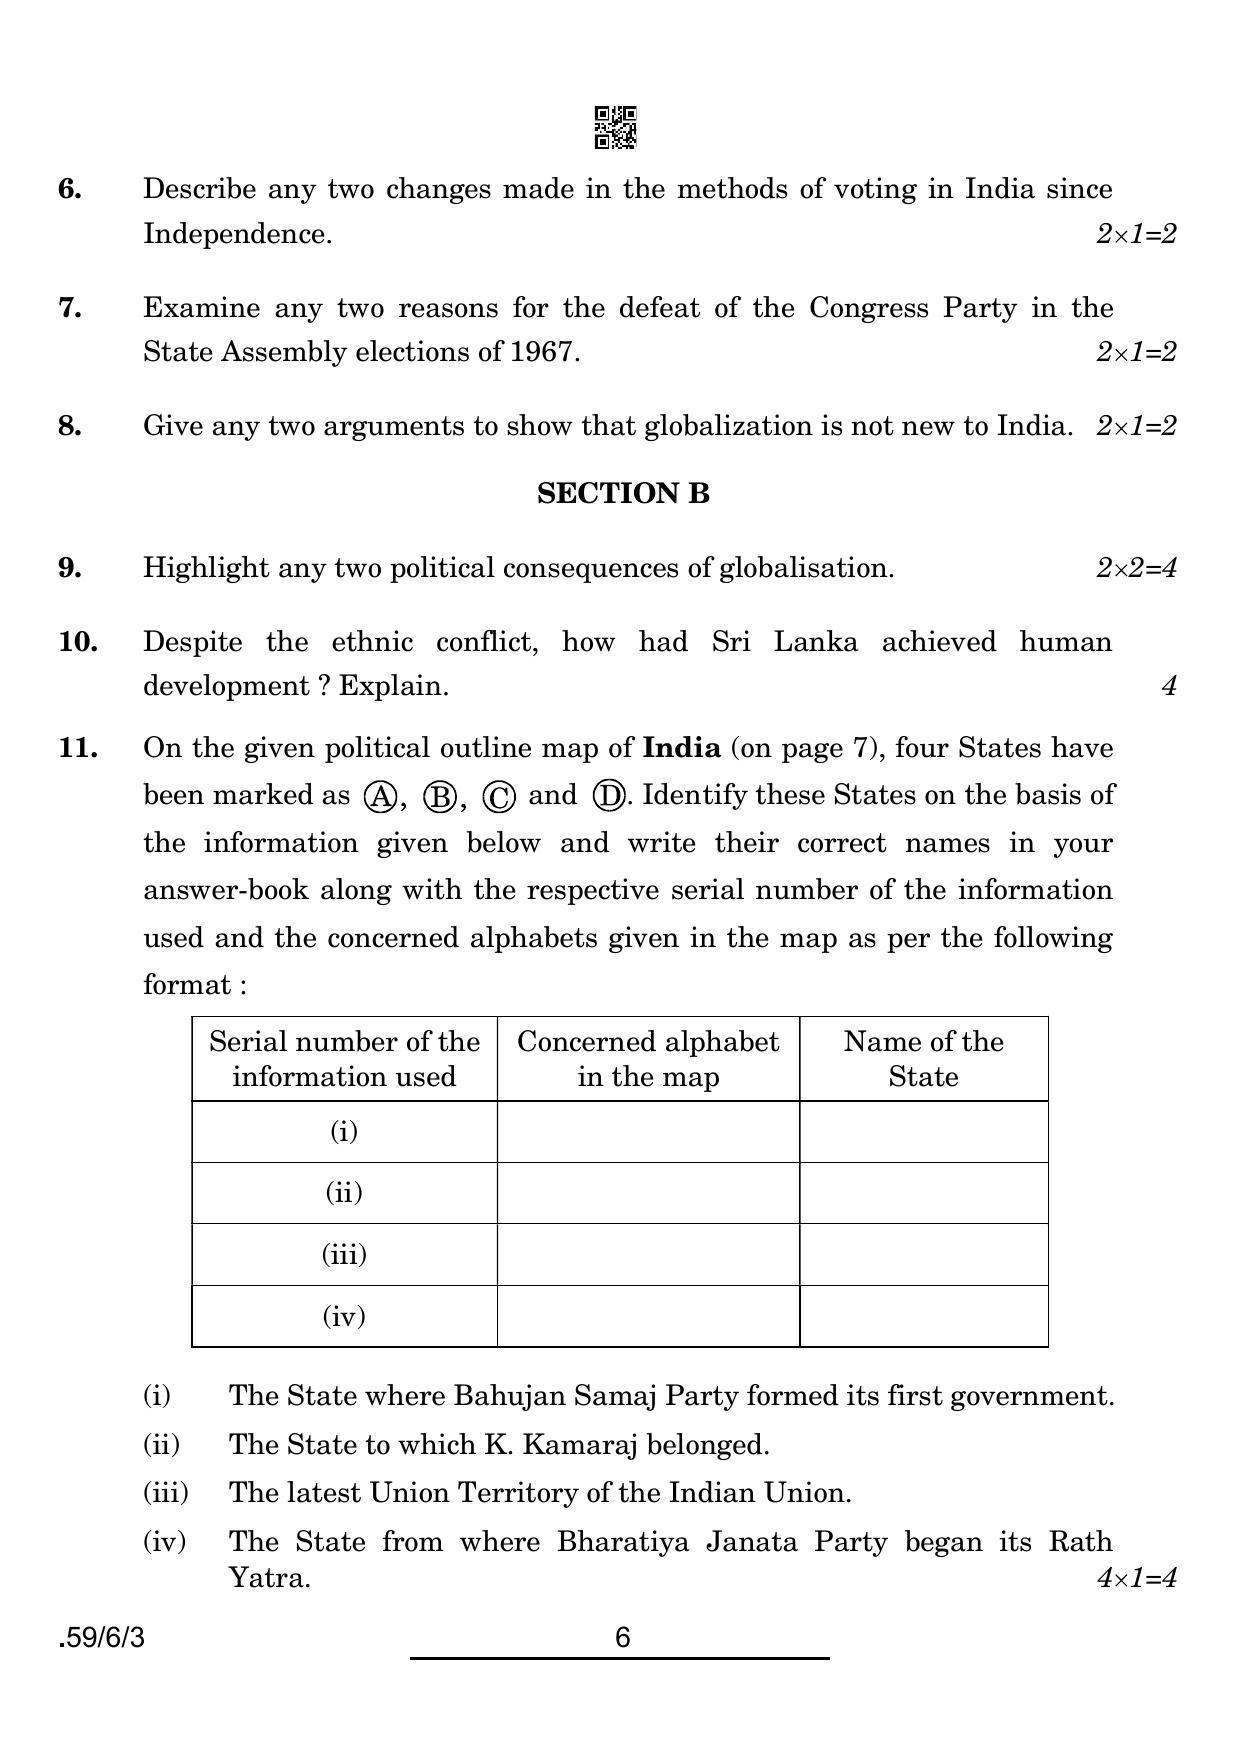 CBSE Class 12 59-6-3 POL SCIENCE 2022 Compartment Question Paper - Page 6